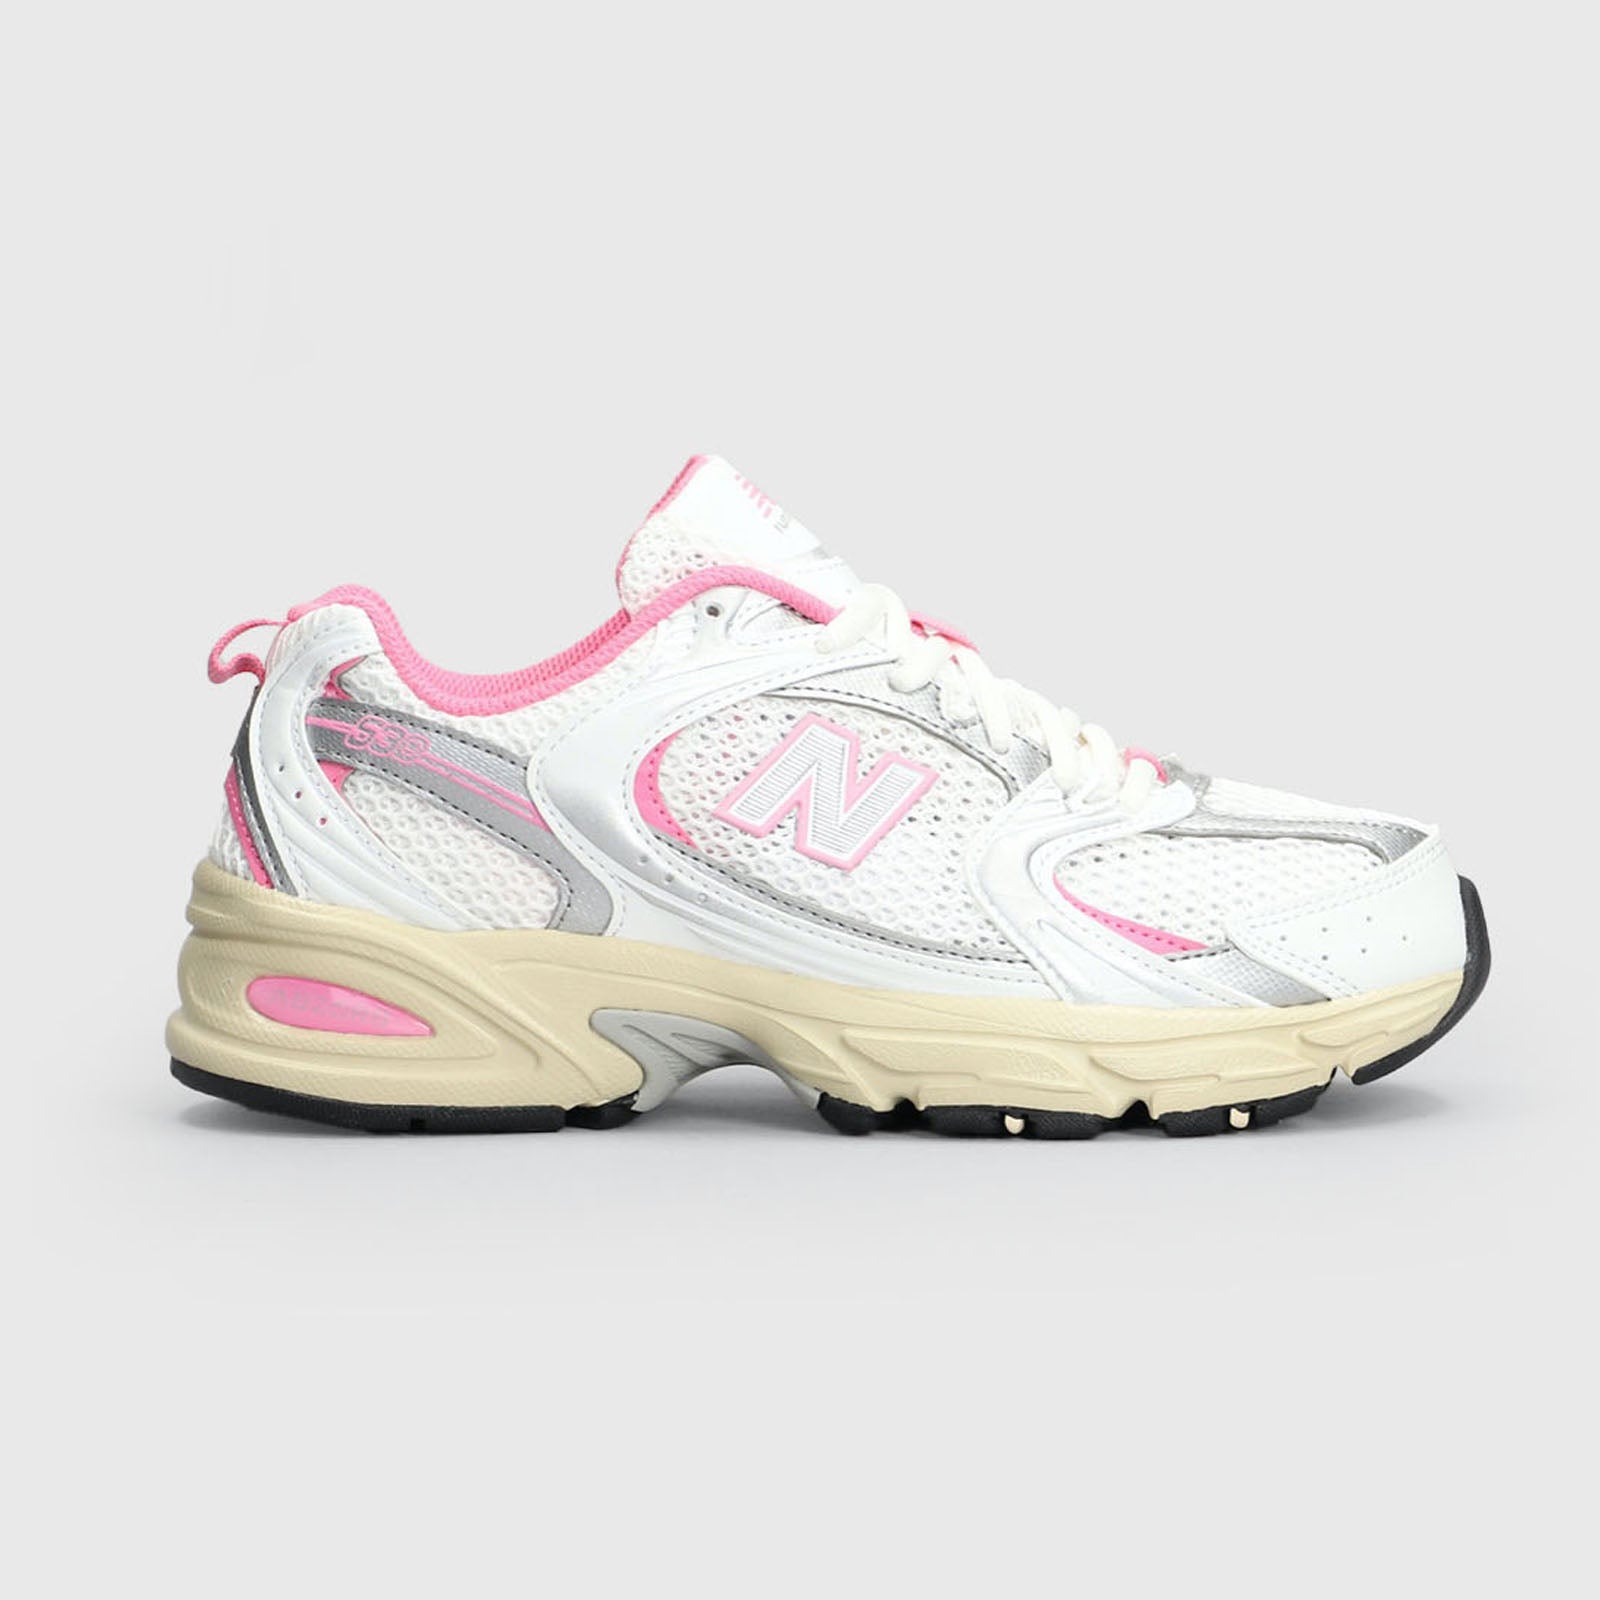 New Balance Sneaker 530 Synthetic White/Pink - 6